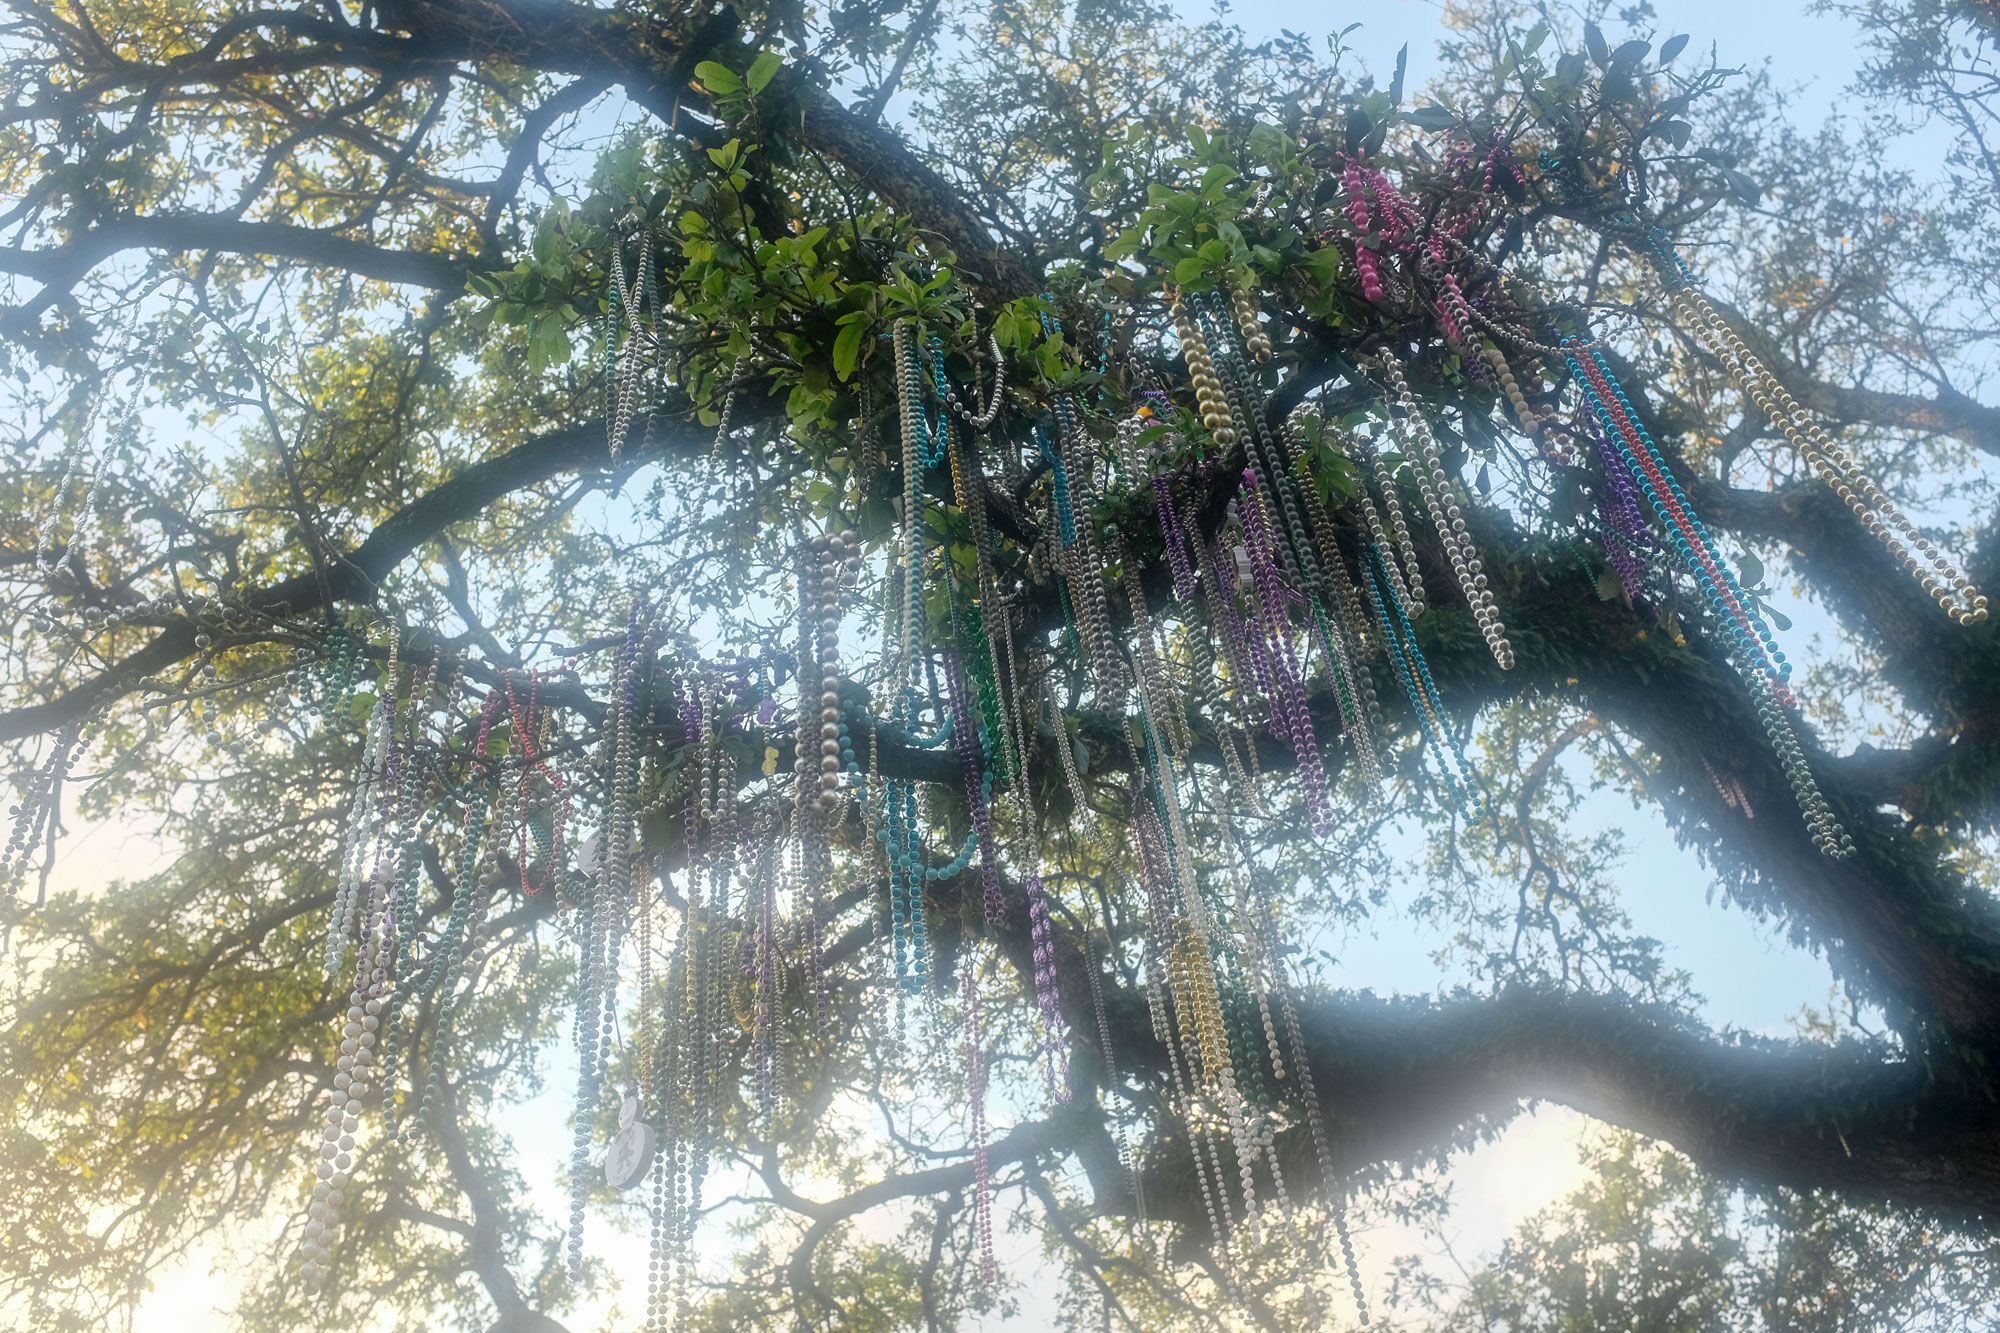 Tree with beads in it